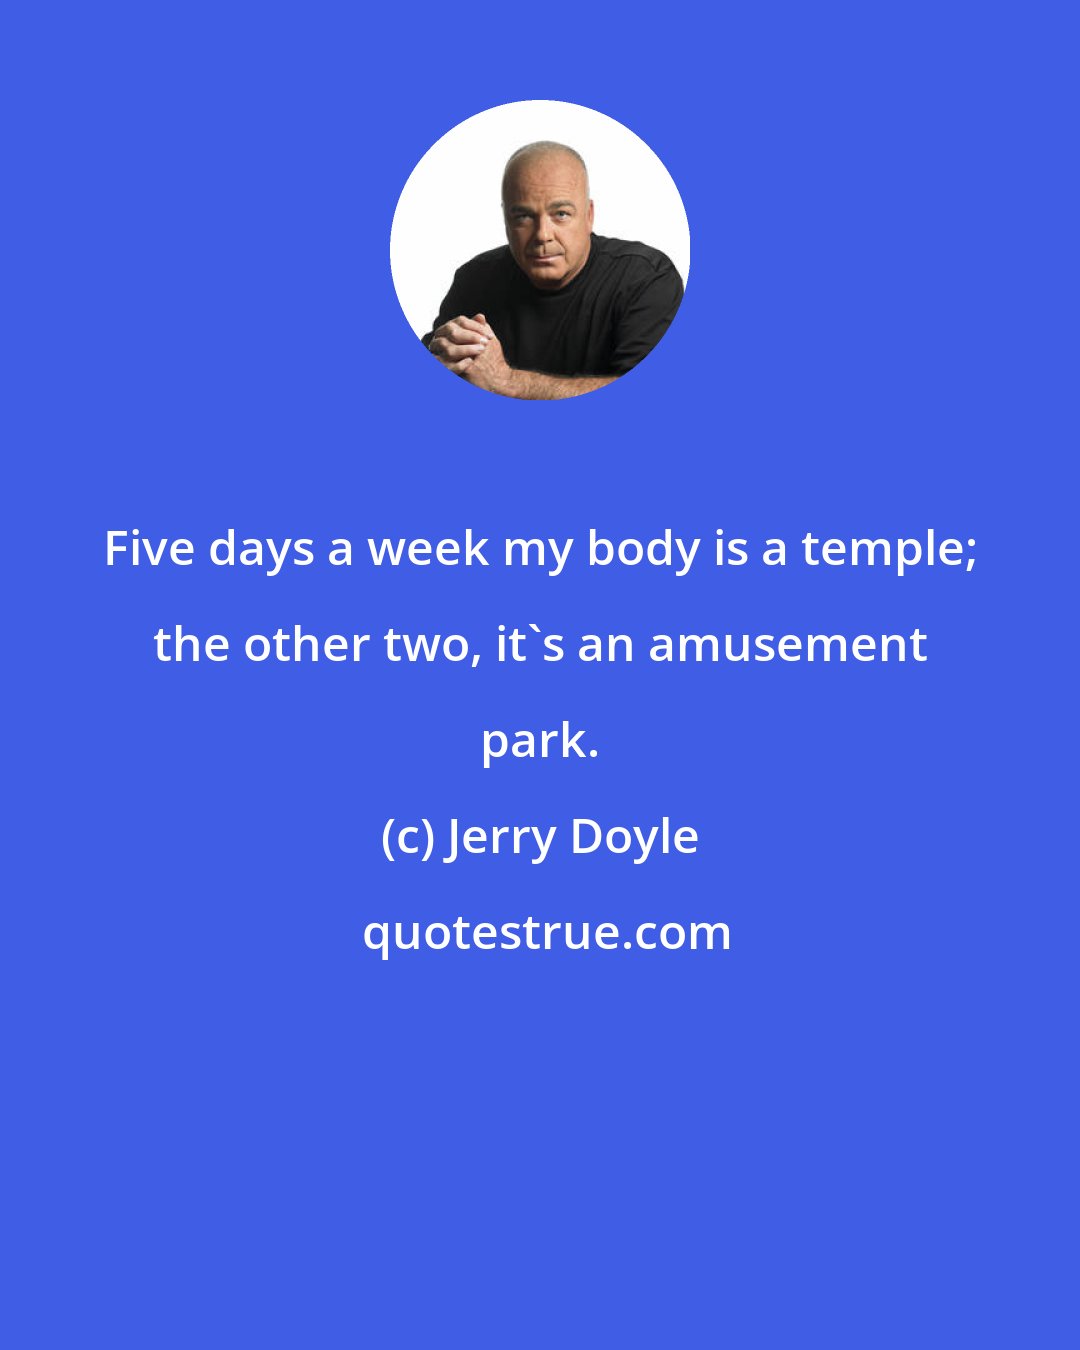 Jerry Doyle: Five days a week my body is a temple; the other two, it's an amusement park.